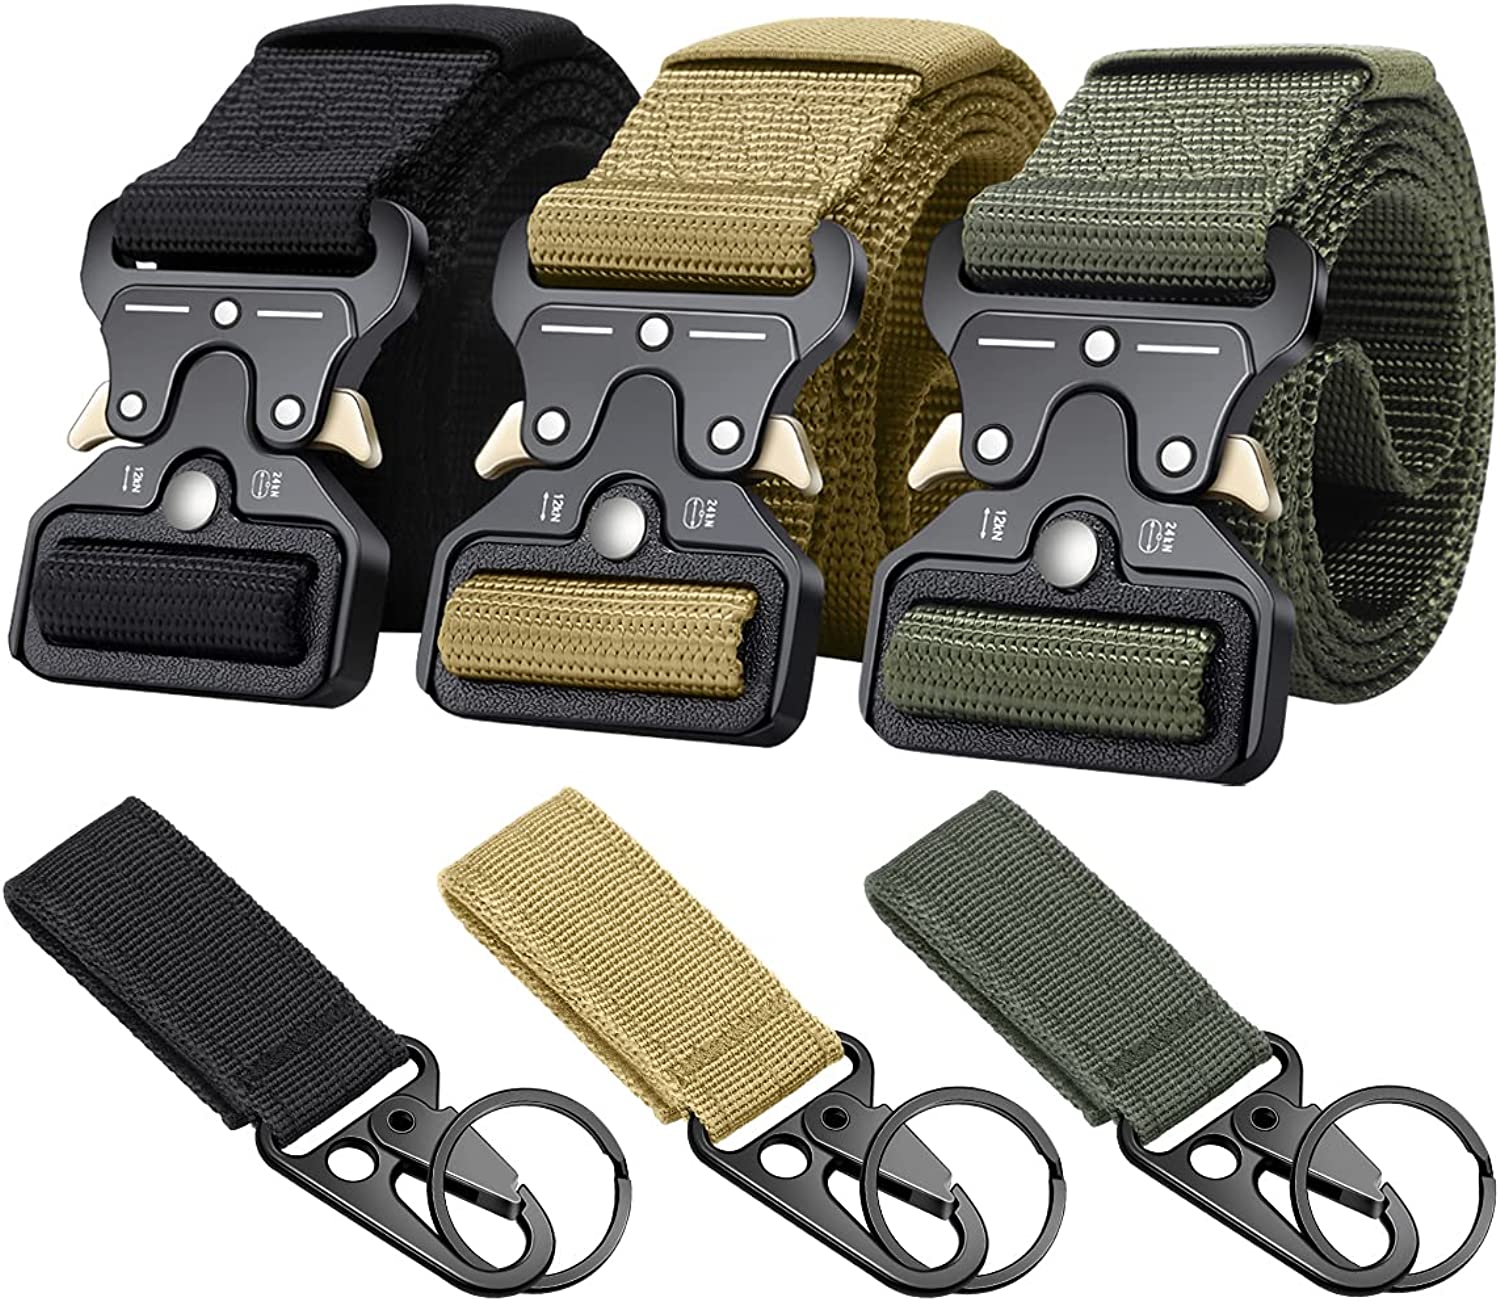 Ginwee 3-Pack Tactical Belt,Military Style Belt, Riggers Belts for Men, Heavy-Duty Quick-Release Metal Buckle with Extra Molle Key Ring Holder Gears